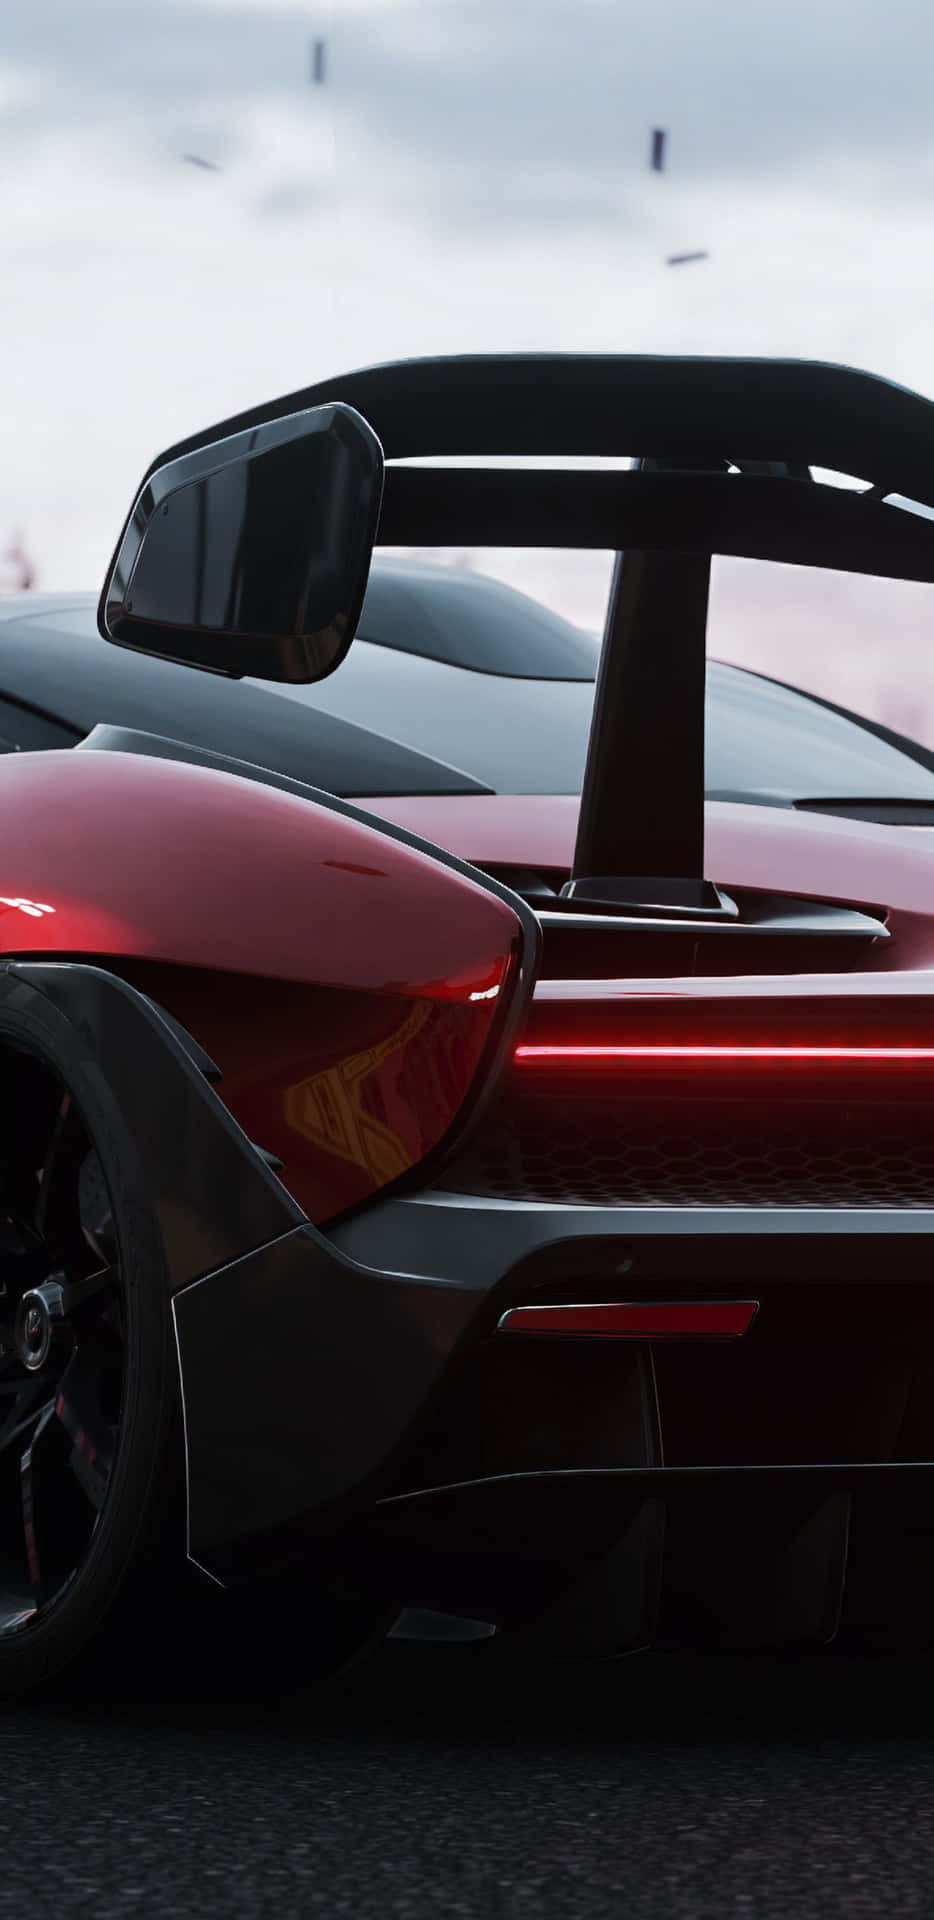 A Red And Black Sports Car With A Rear View